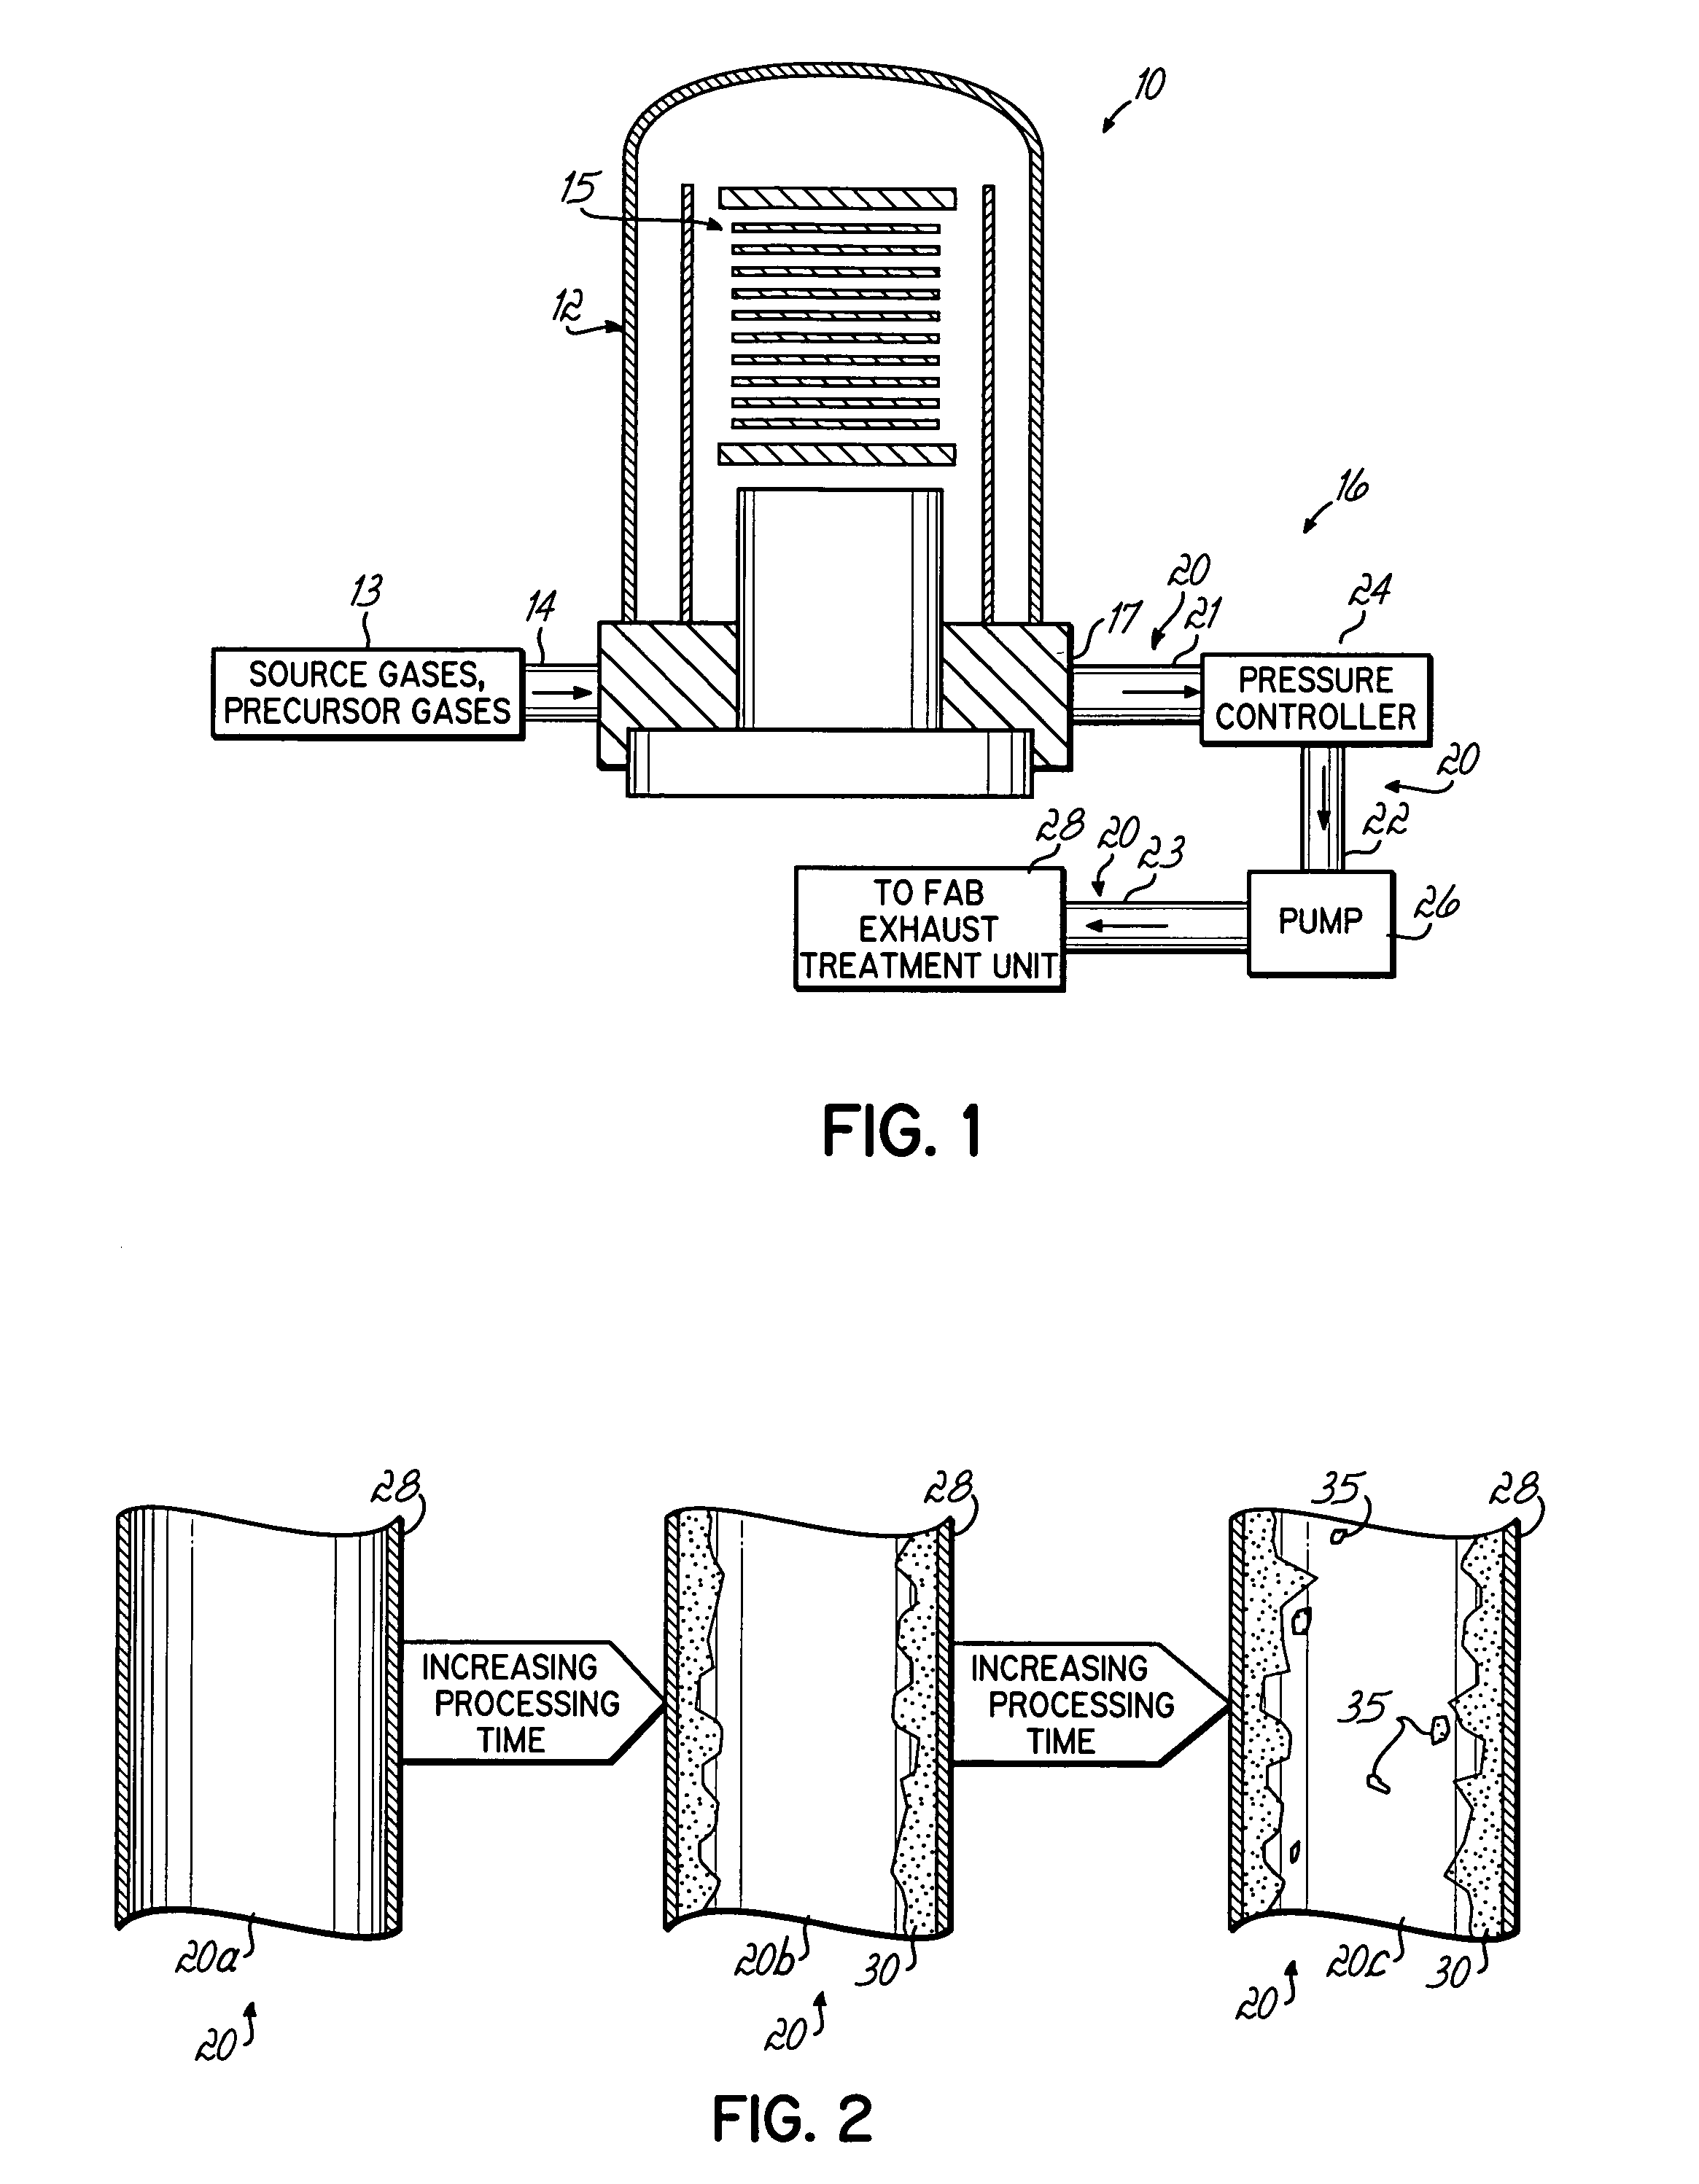 Exhaust buildup monitoring in semiconductor processing